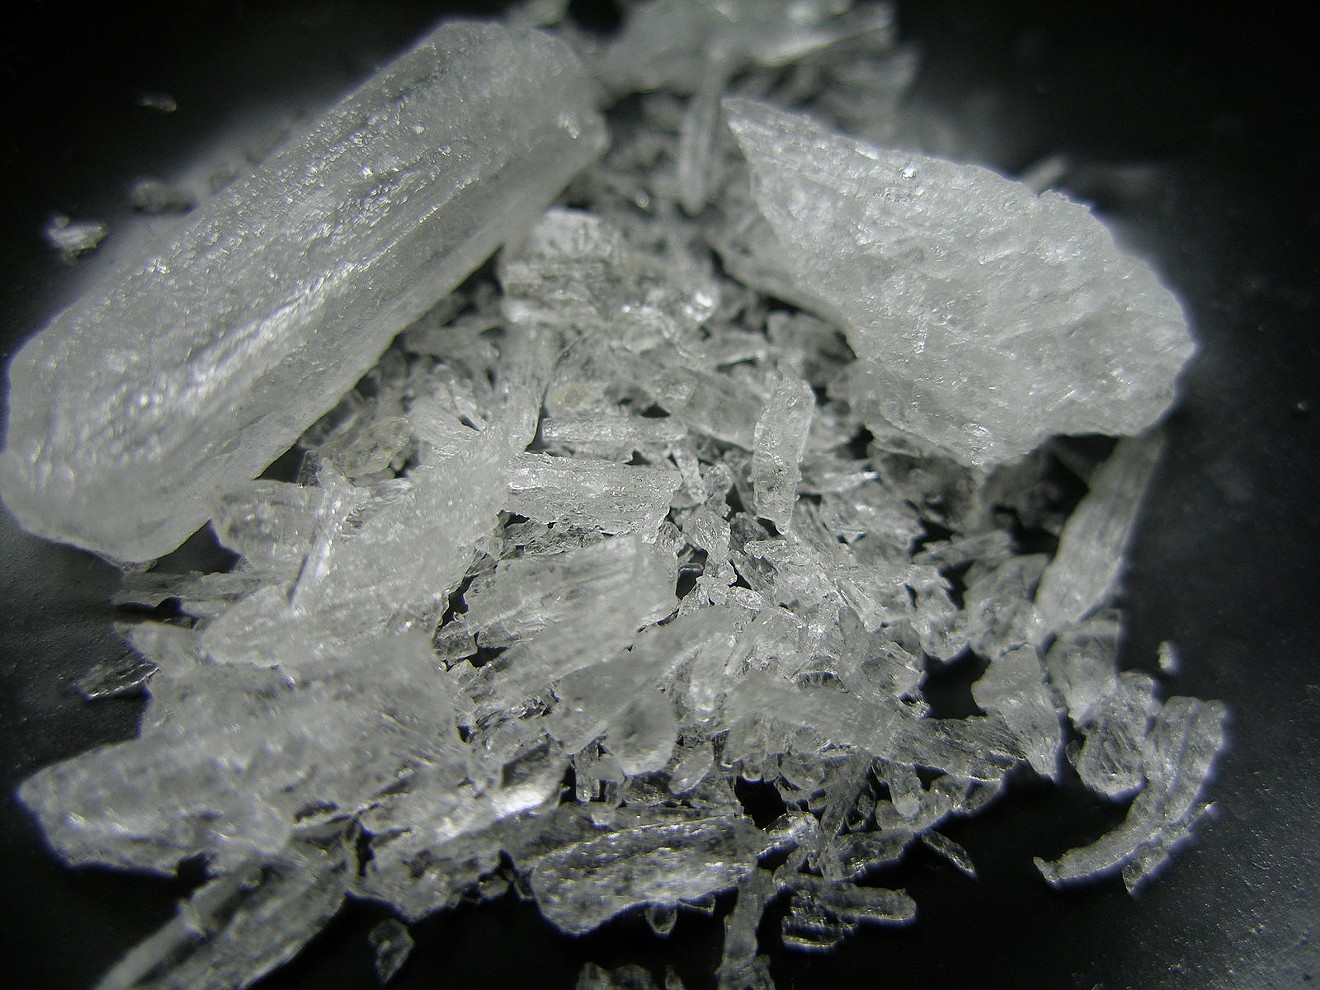 A Florence Police Department officer was accused of consuming and selling meth while on-duty.